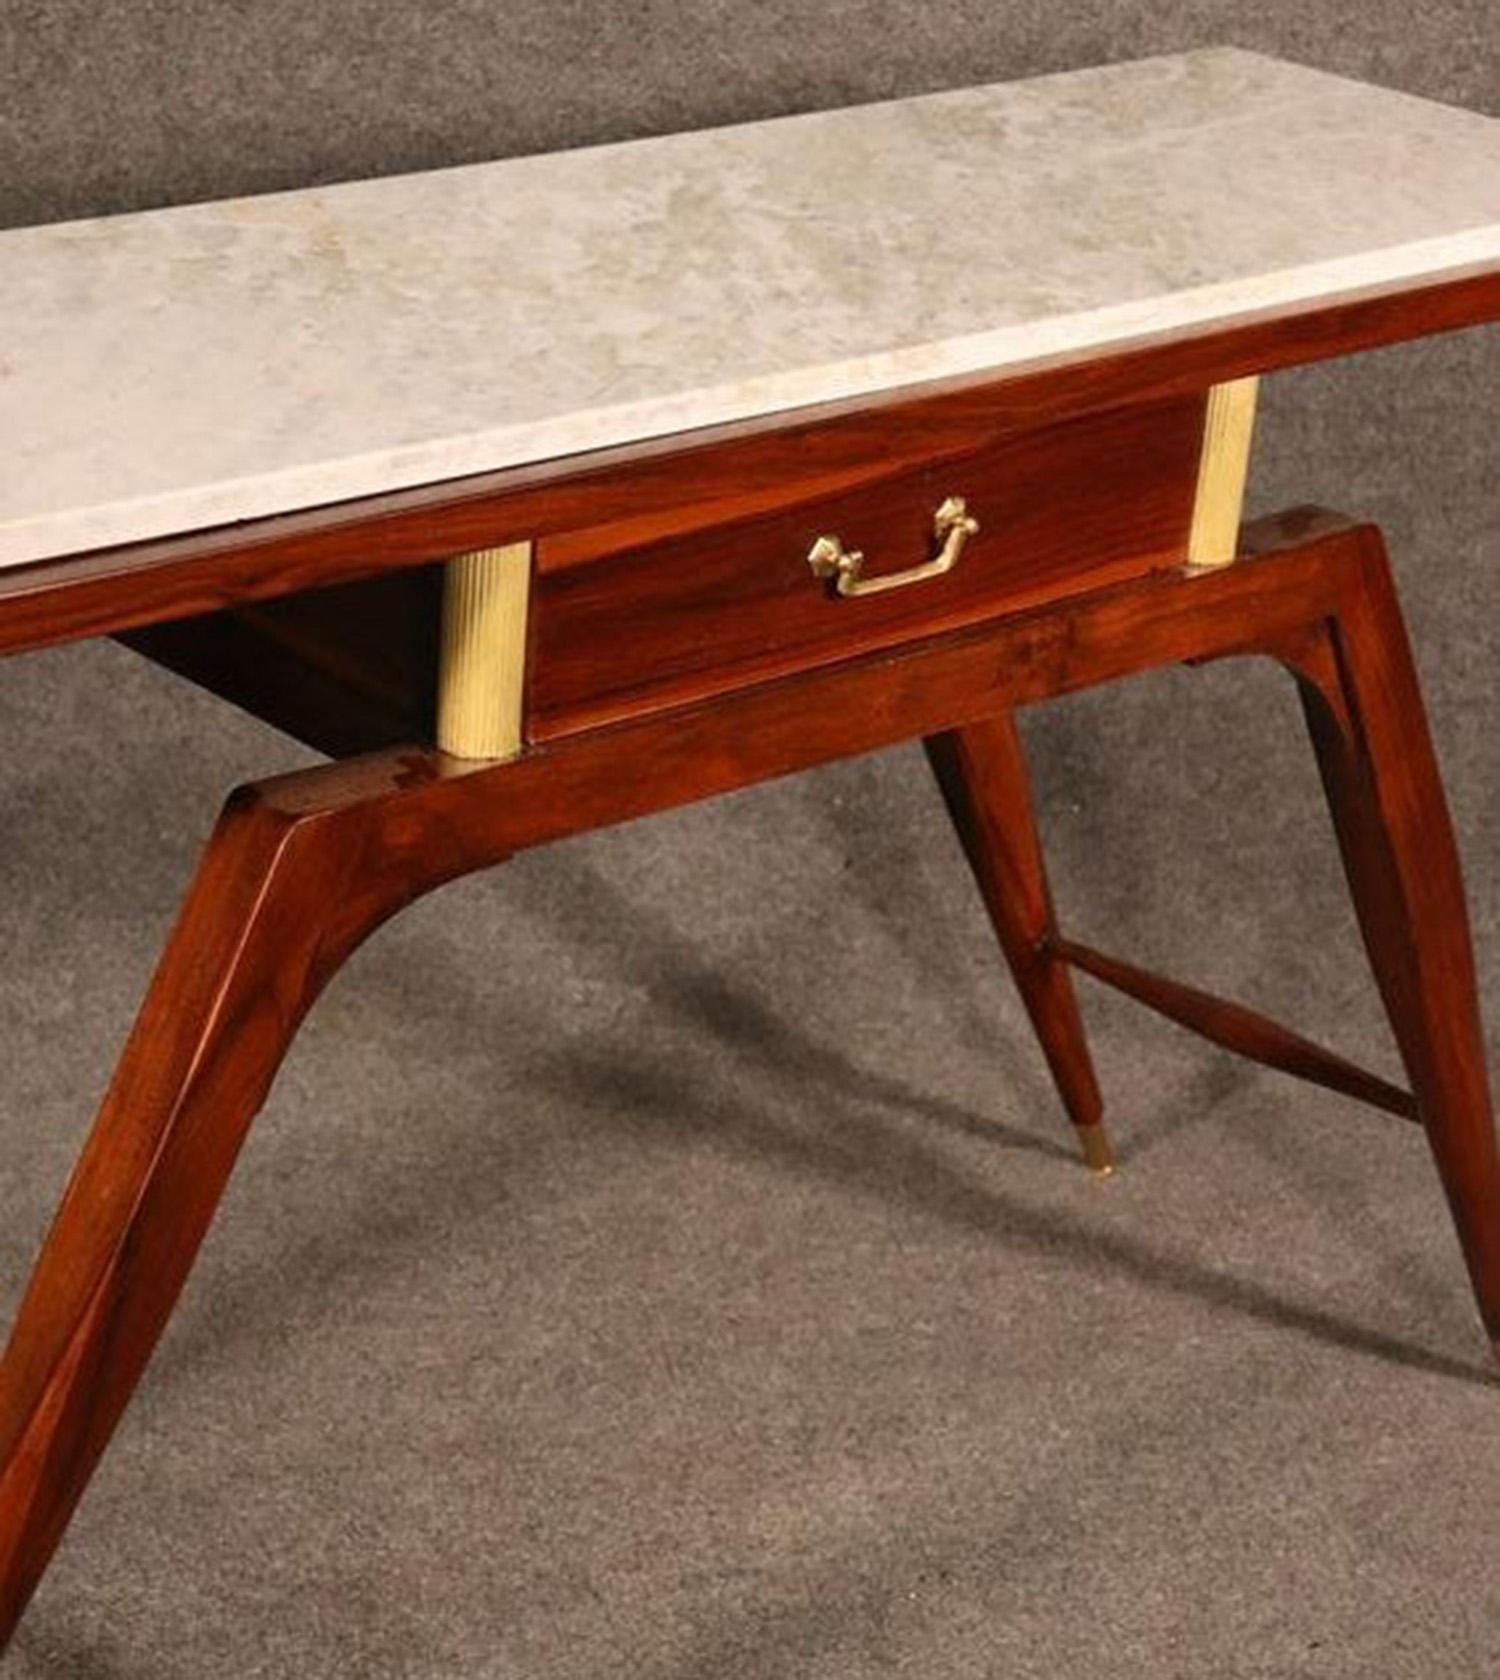 This a gorgeous table. Look at the marble top and super-sleek lines, circa 1950. Measures: 52 wide x 32 tall x 16 deep beautiful conditions no damage to the marble top.